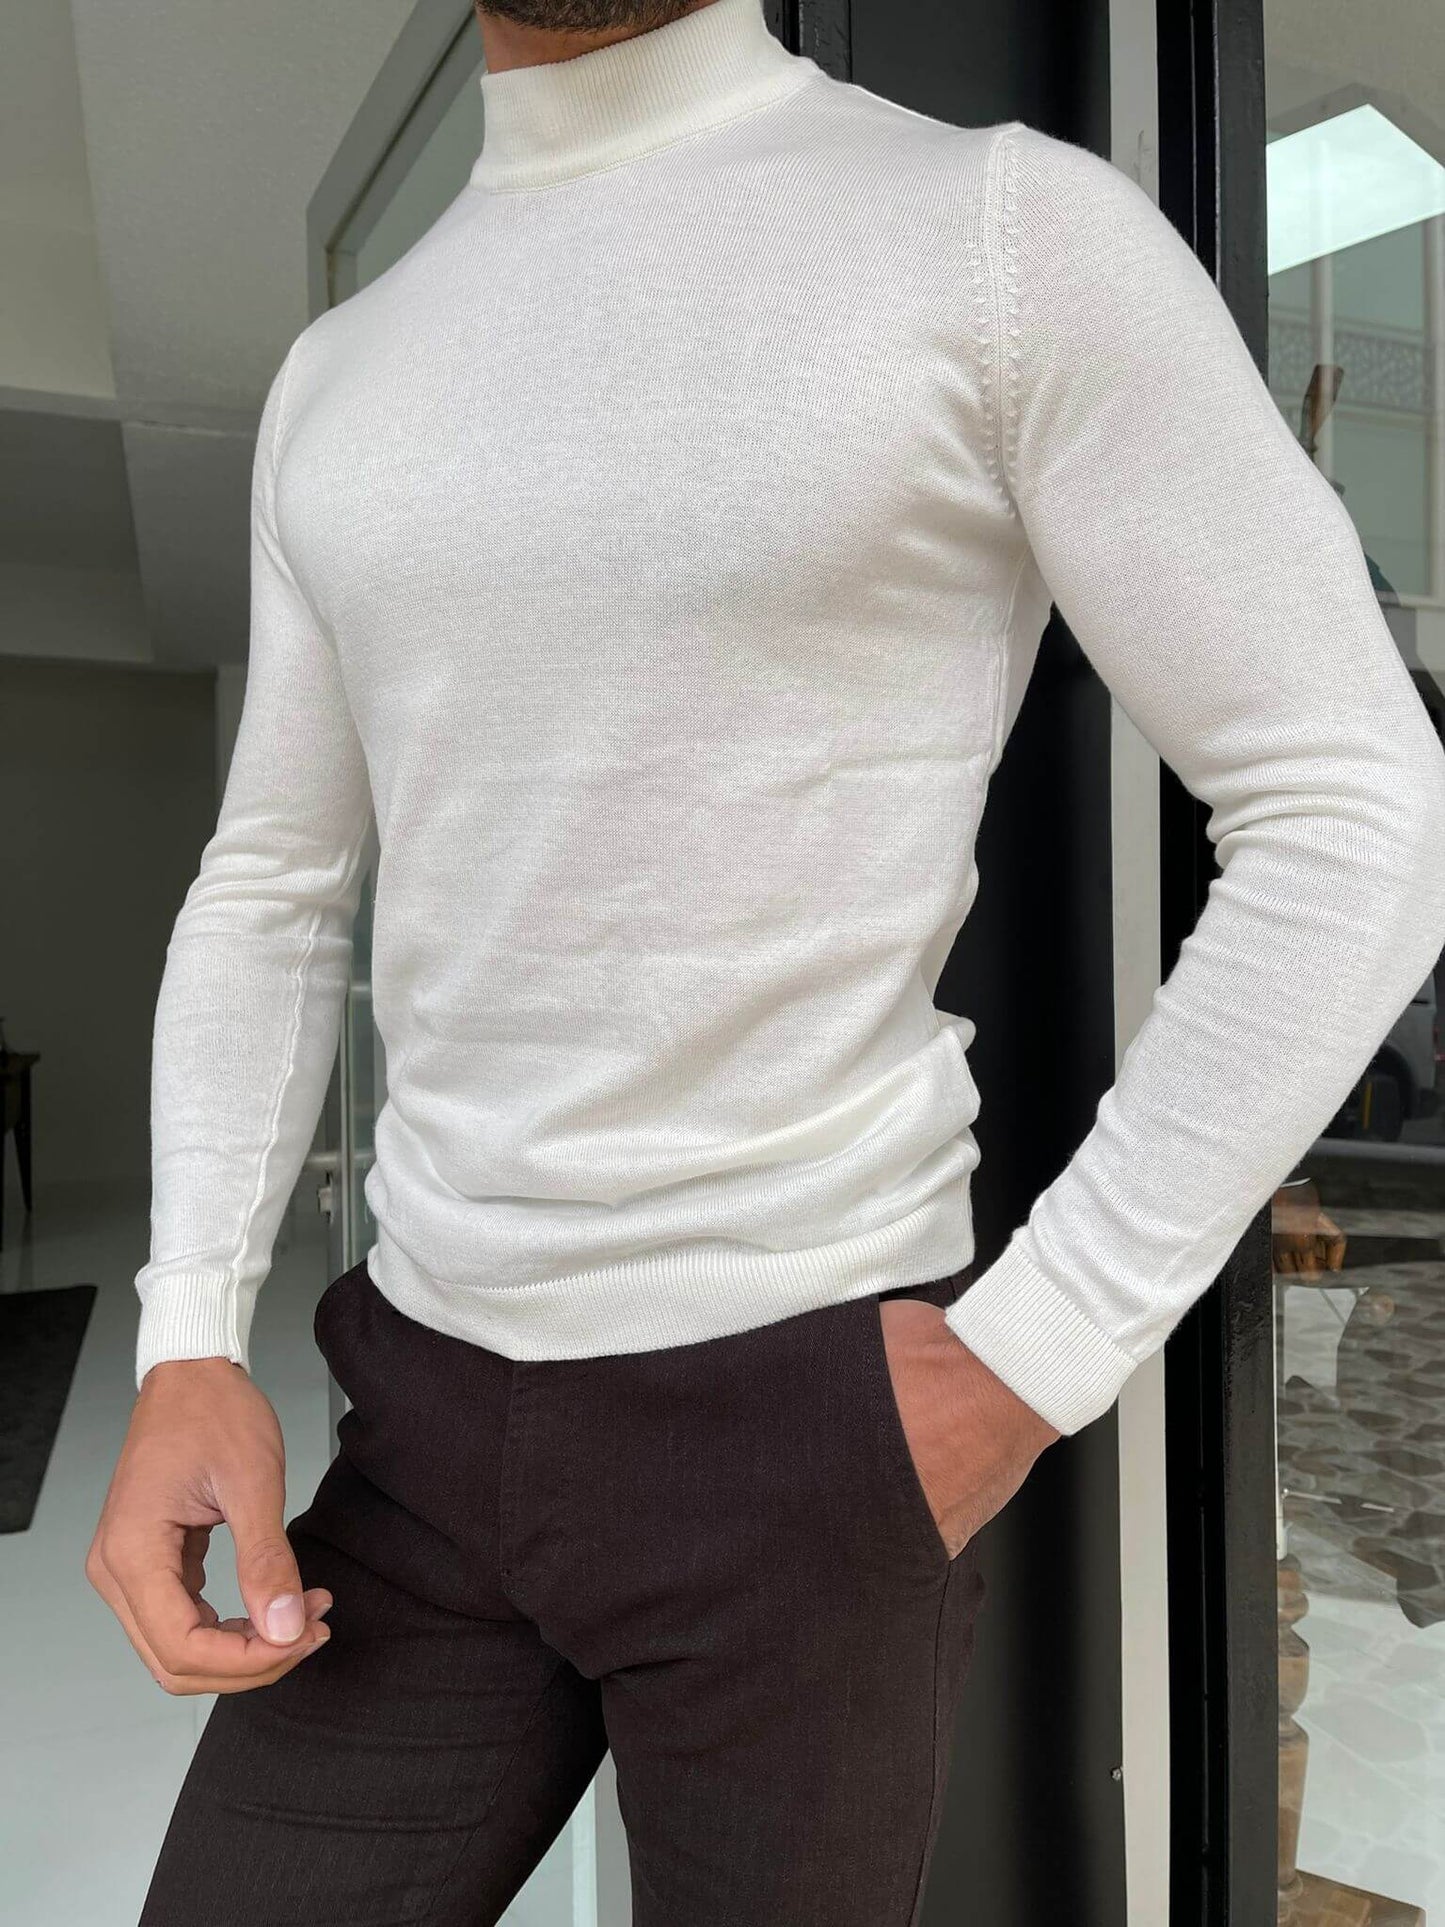 "An elegant Hollo Ecru Turtleneck, a soft and cozy turtleneck sweater in a neutral ecru color, perfect for cool weather and versatile for any occasion